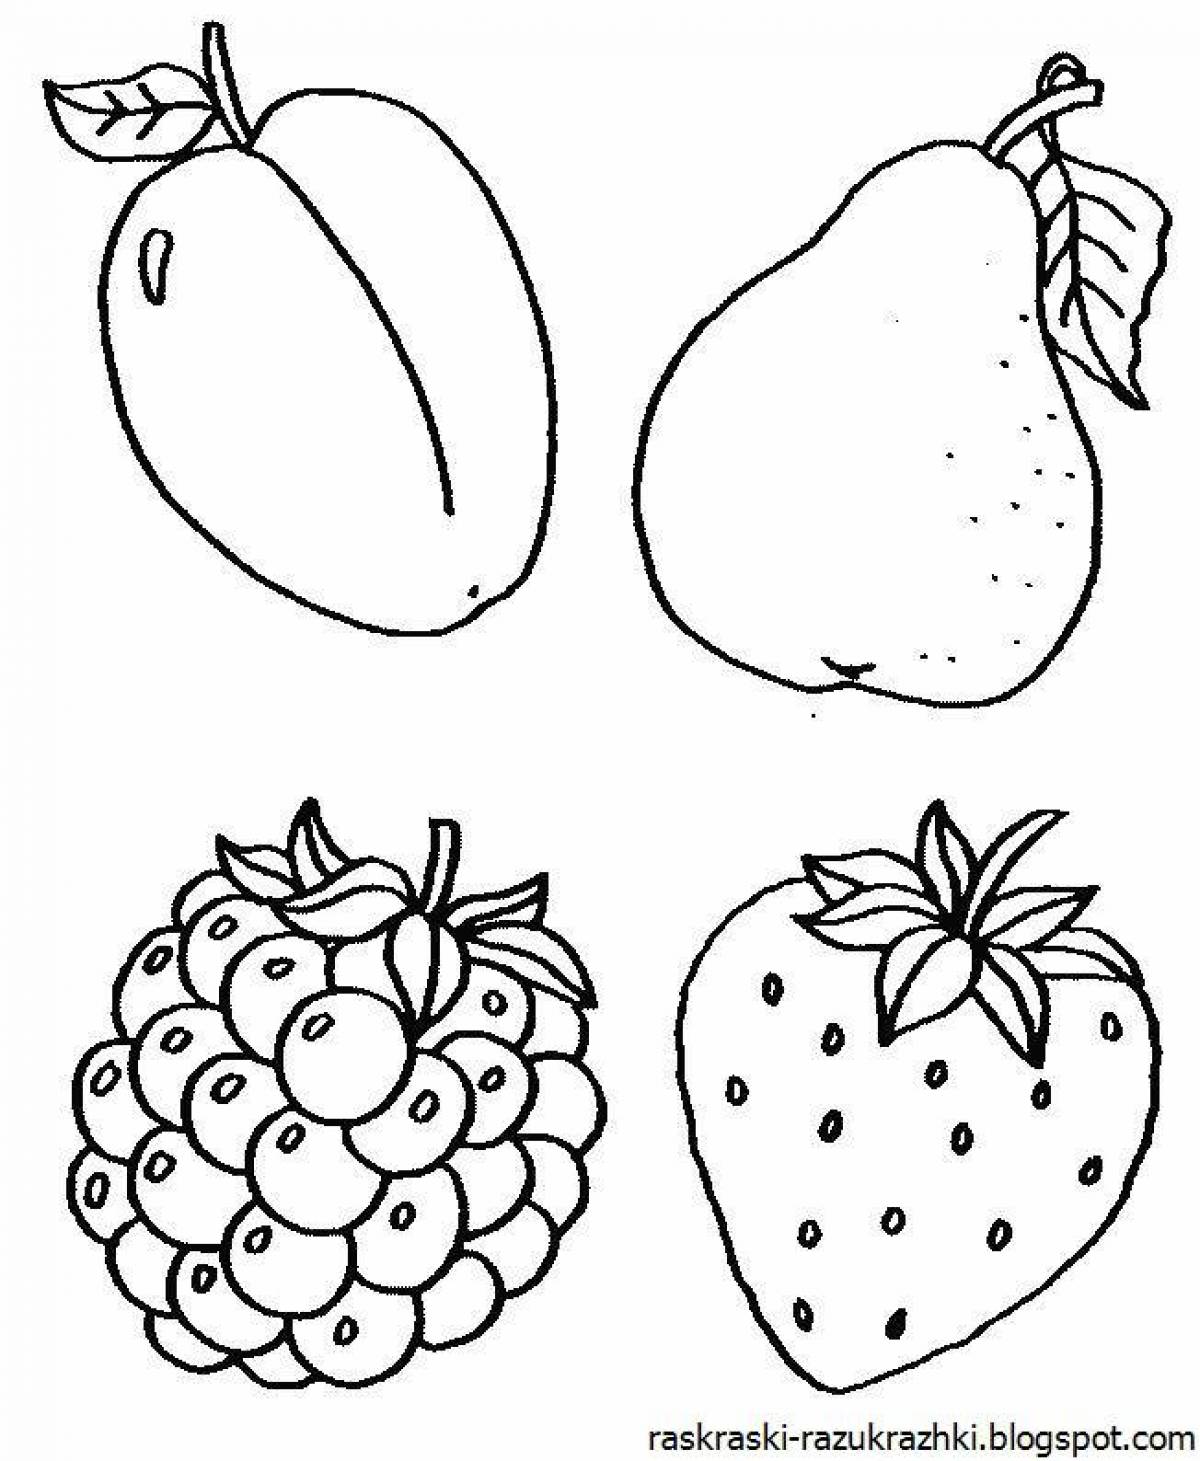 Exciting coloring pages with fruits and vegetables for kids